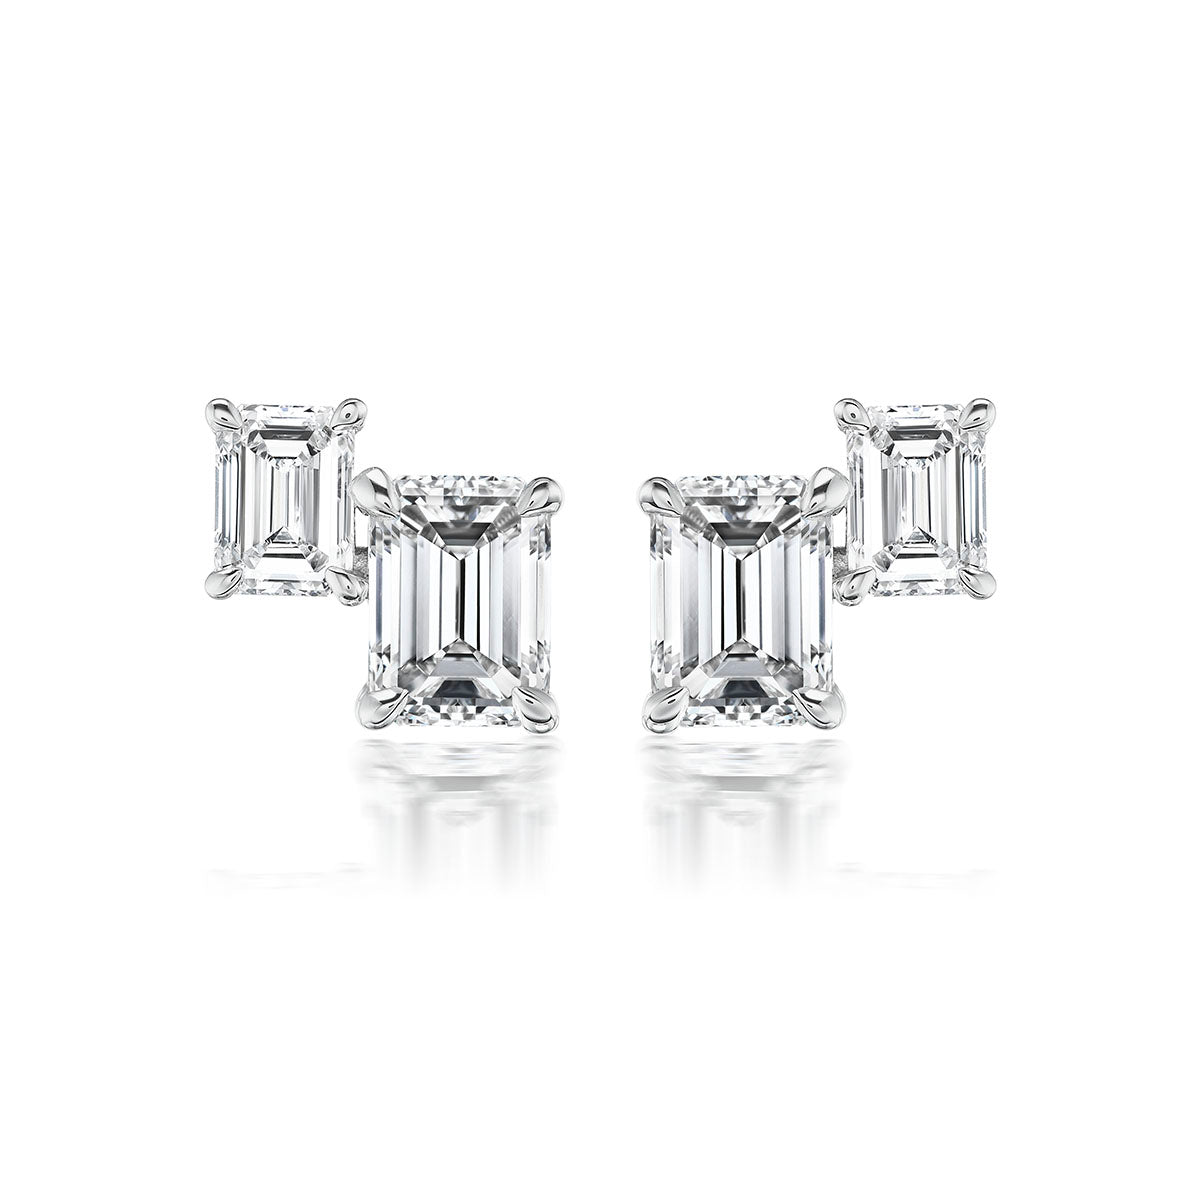 Duo Studs in White Gold with Emerald Cut Diamonds